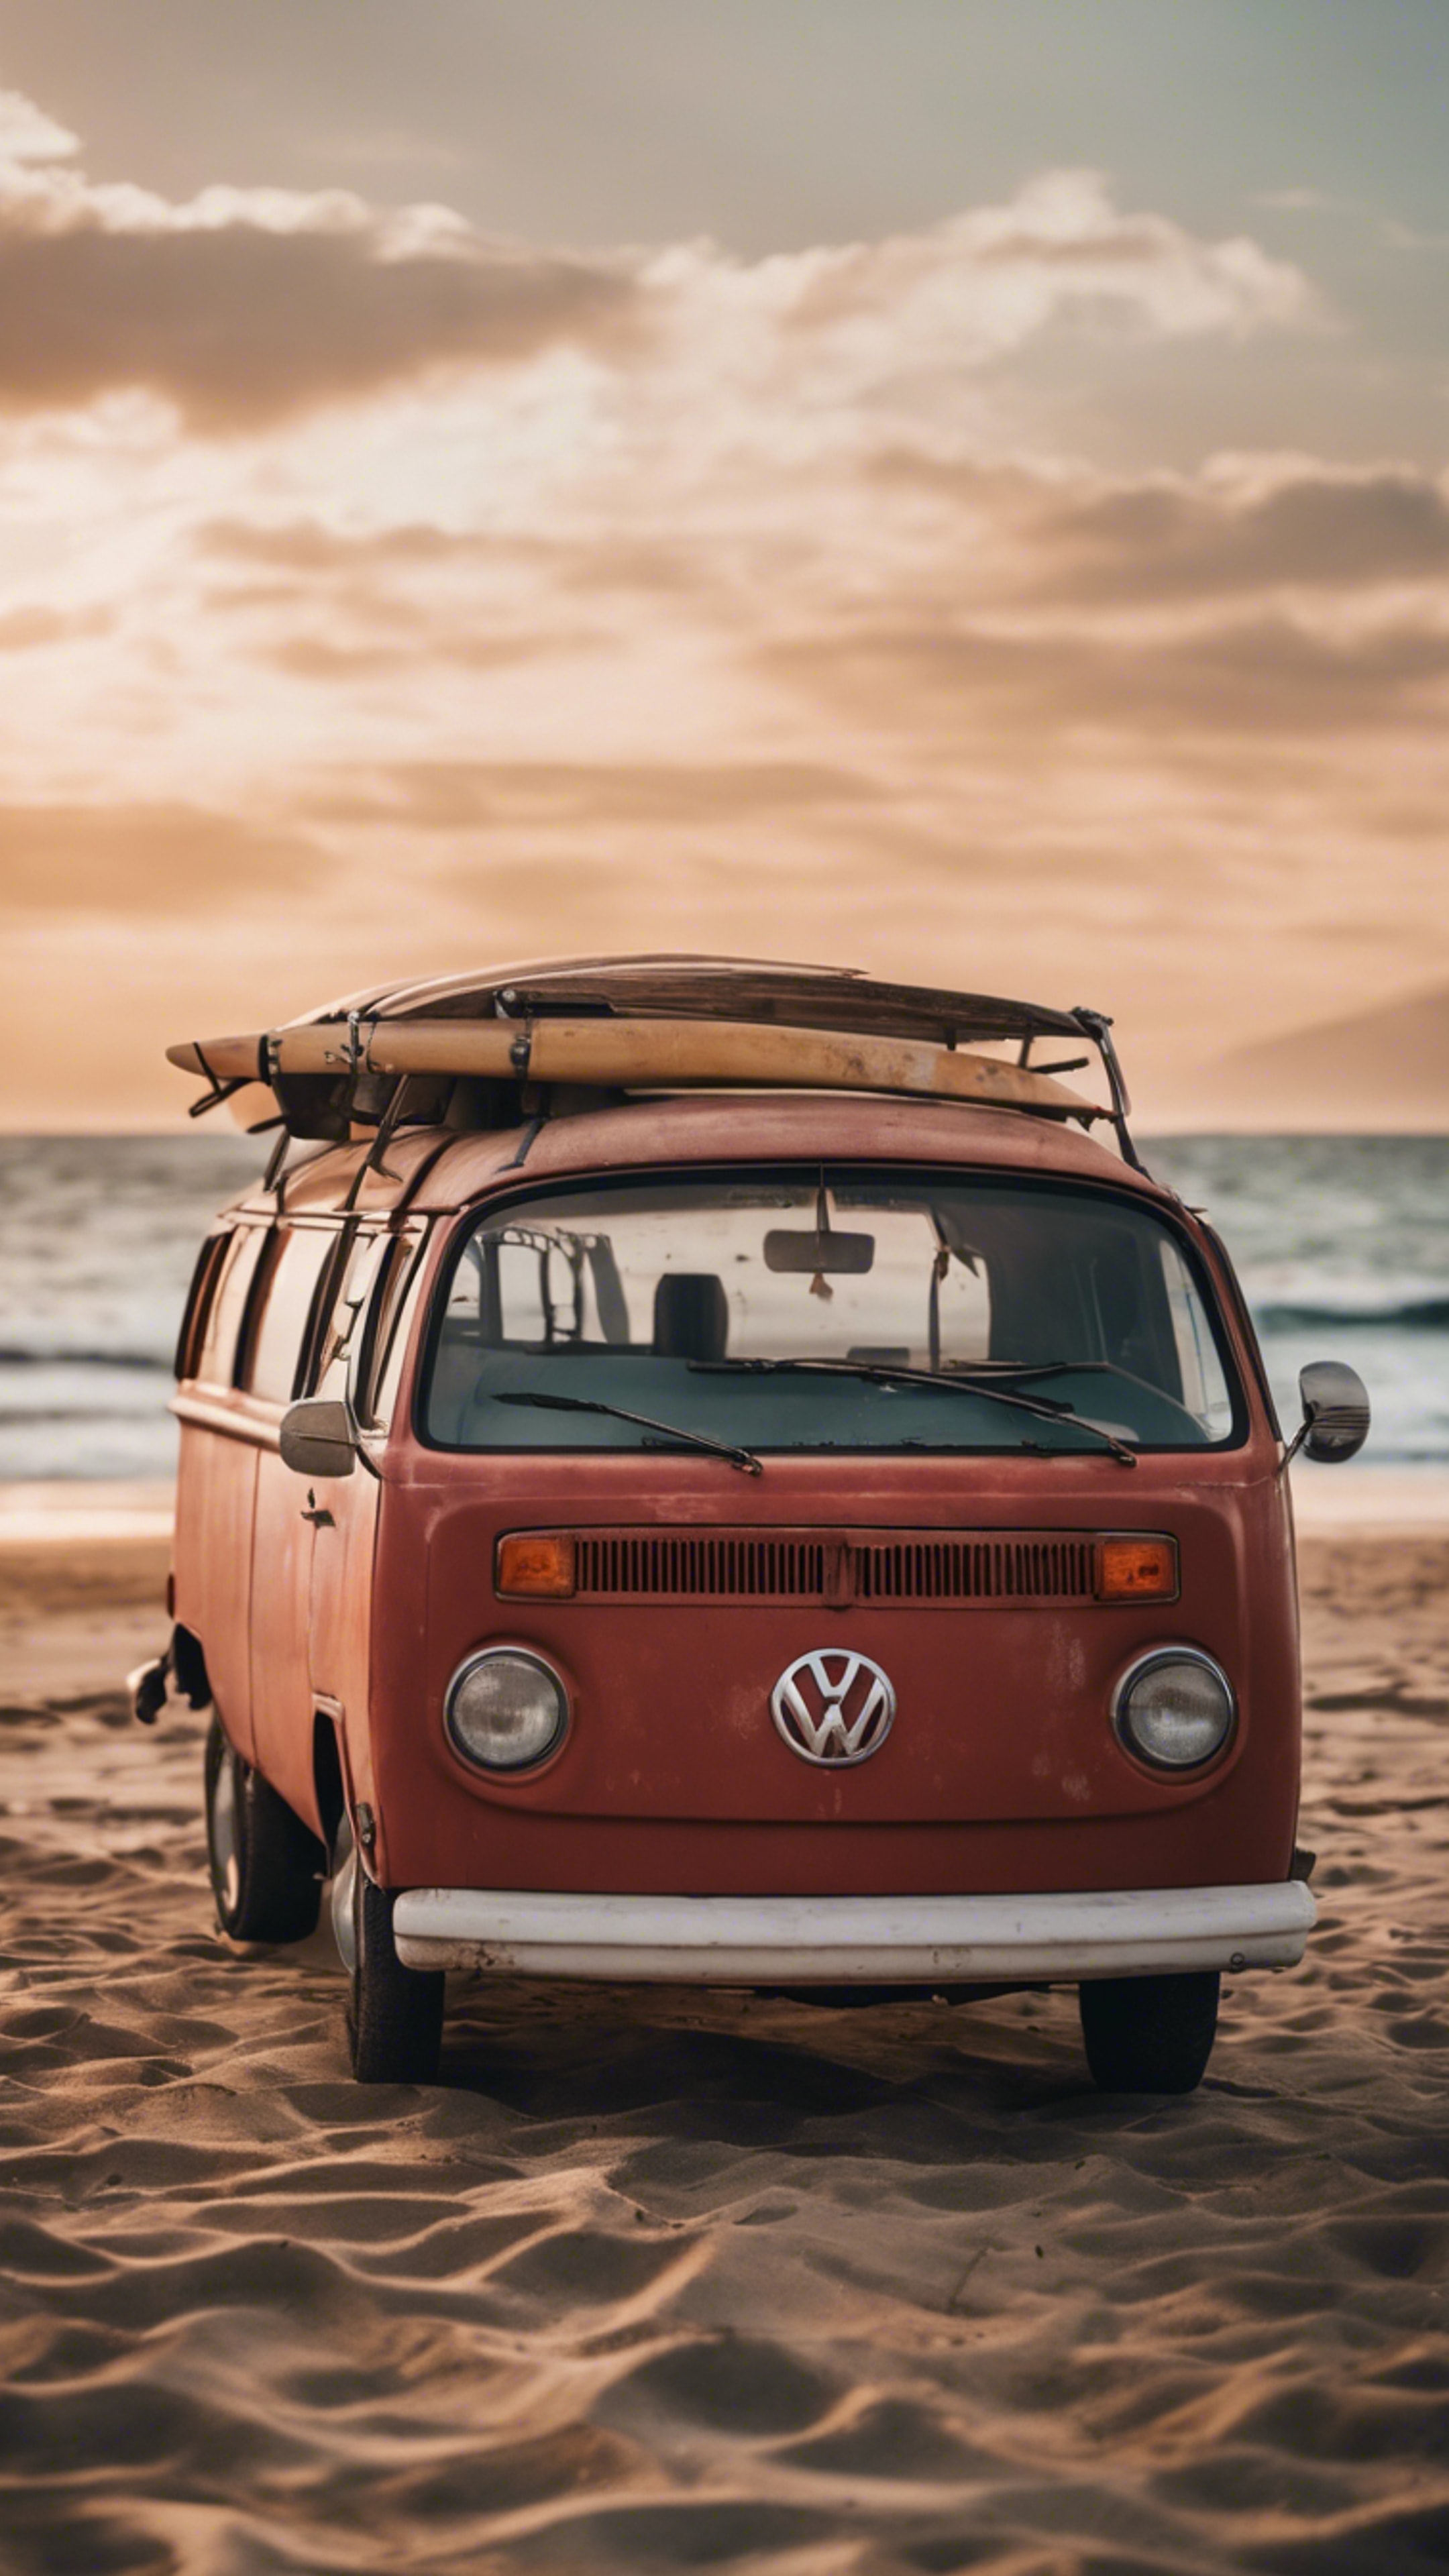 An old, rusted red Volkswagen van parked at a beach with the sunset in the backdrop, surfboards leaning against it. Дэлгэцийн зураг[f96813b3e584499cadbf]